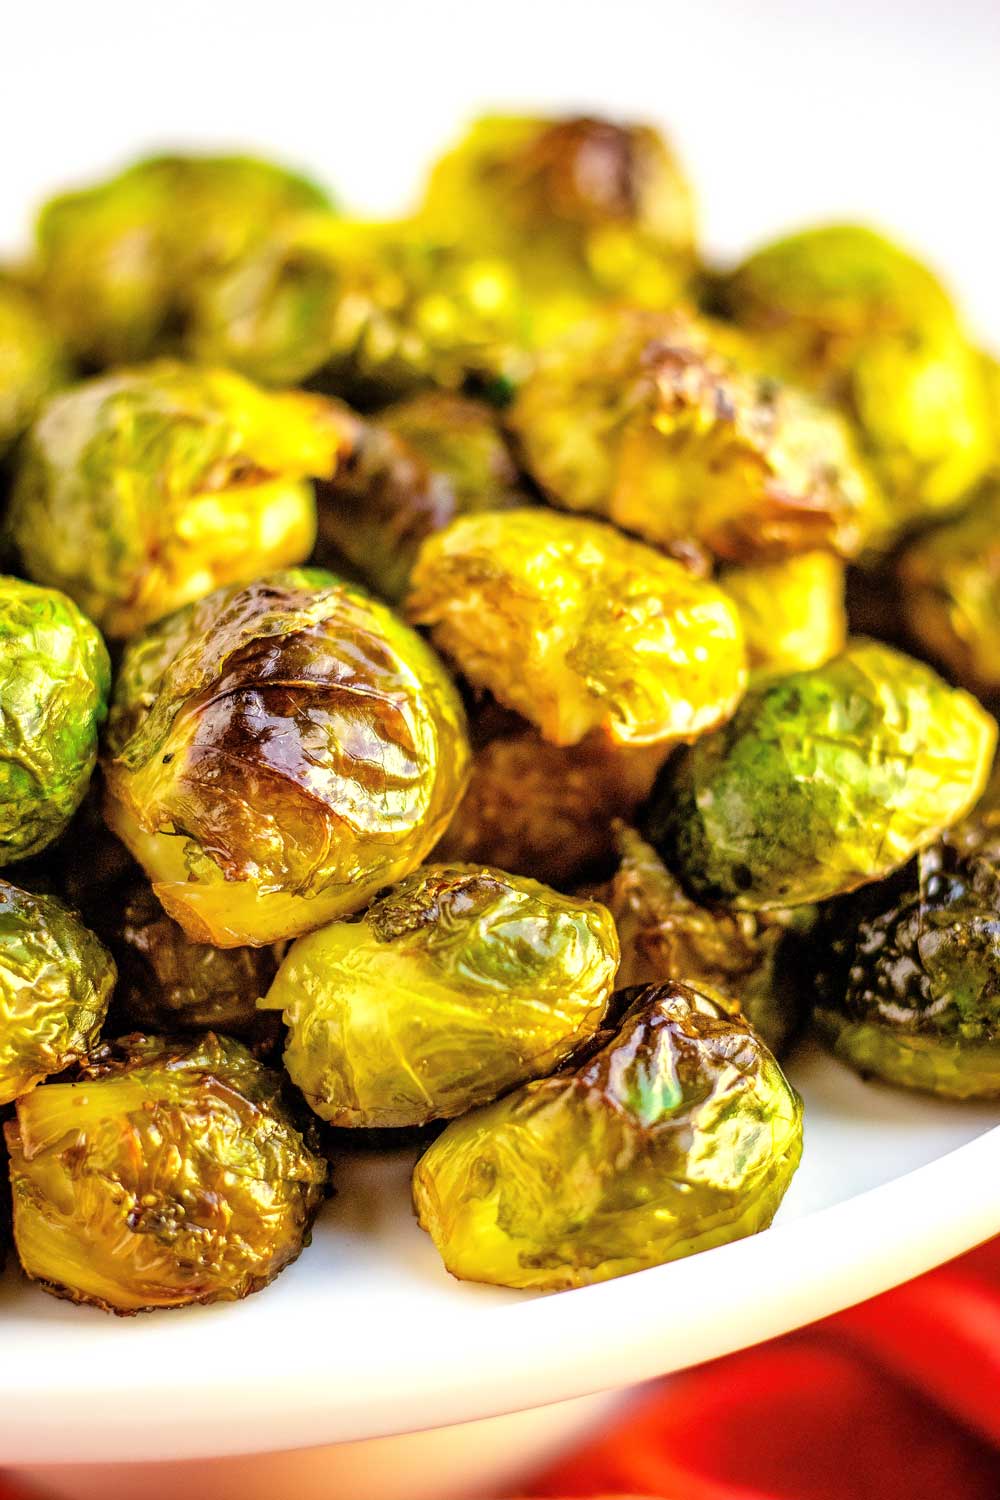 Brussel Sprouts recipe